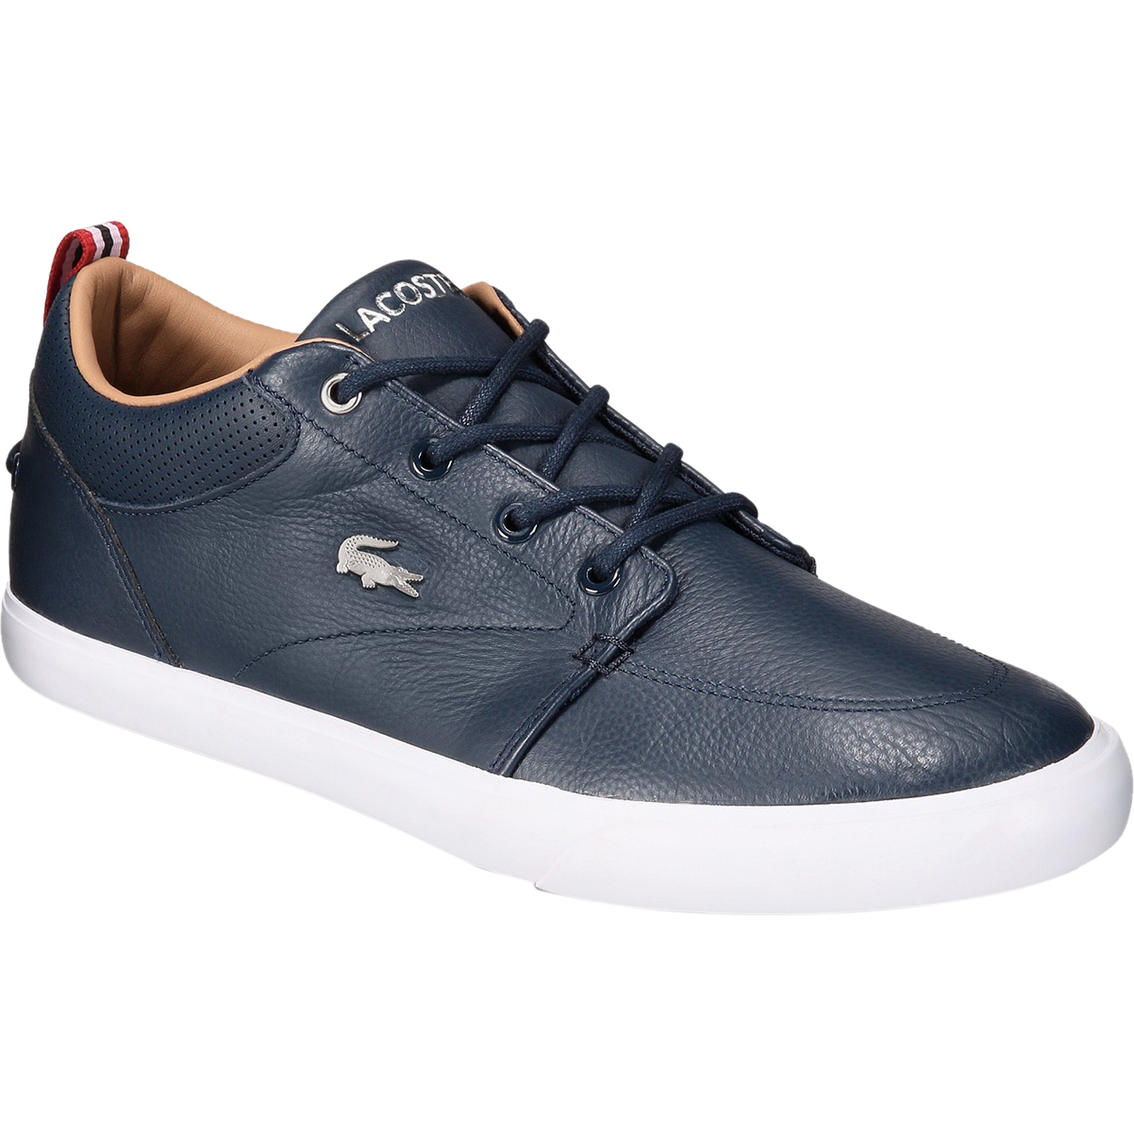 Lacoste Men's Bayliss 1191u Leather Lace Up Sneakers | Sneakers | Shoes ...